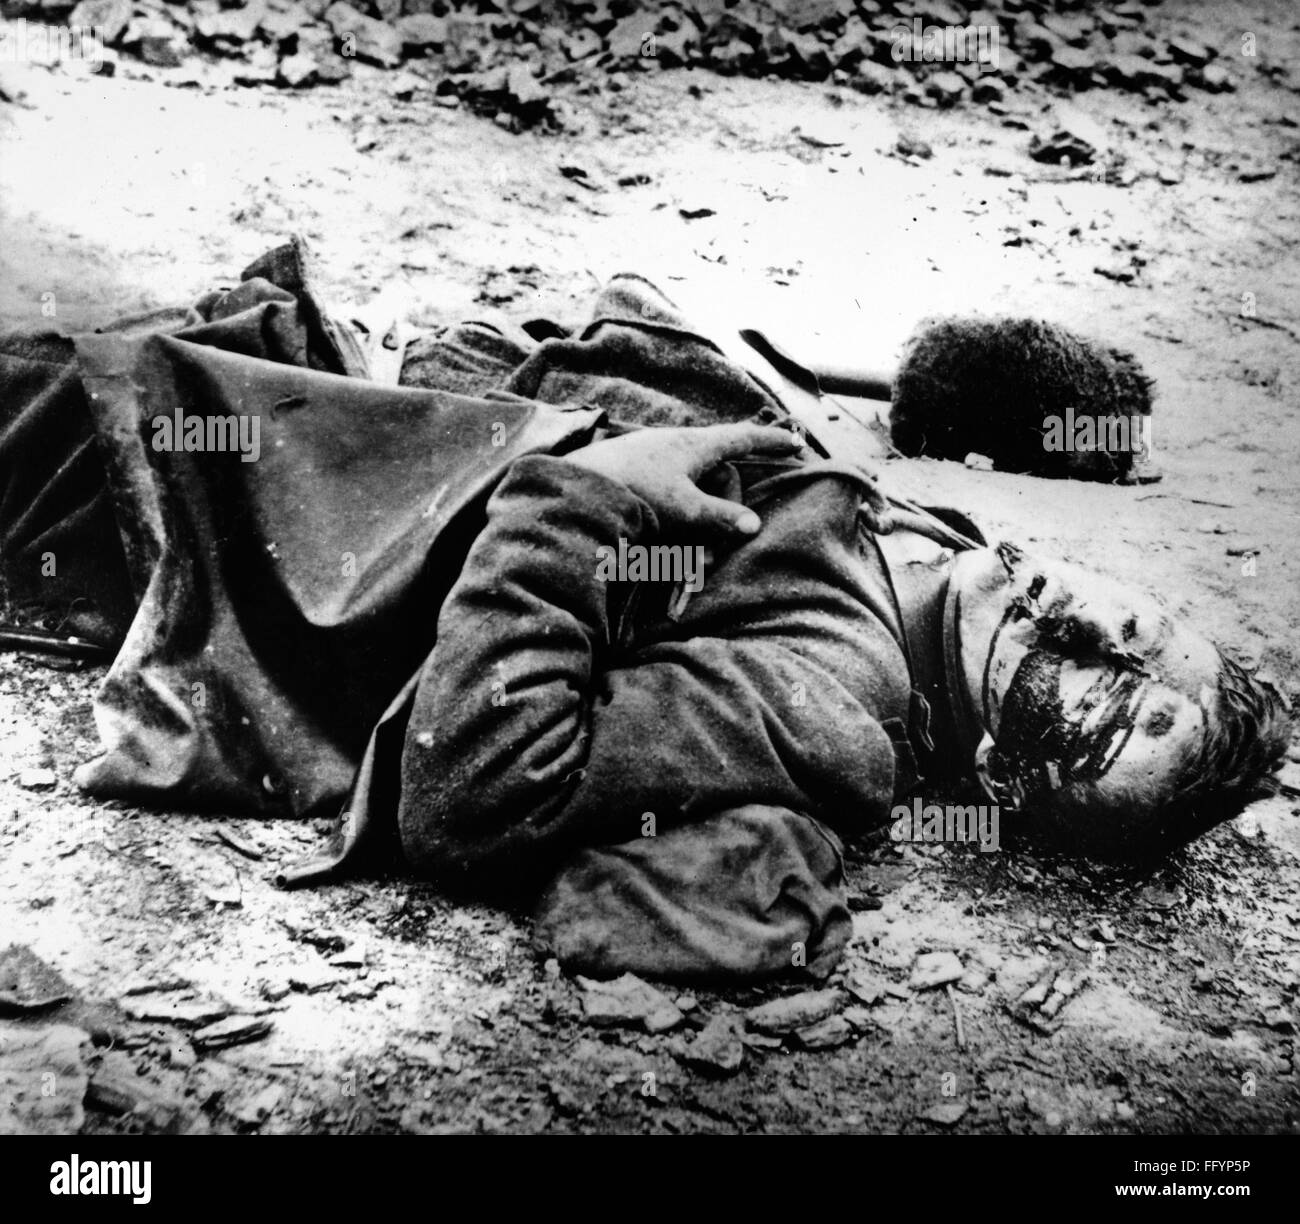 CIVIL WAR: DEAD SOLDIER. /nA dead soldier with a cannon ramrod next to him.  Photographed during the American Civil War, c1863 Stock Photo - Alamy